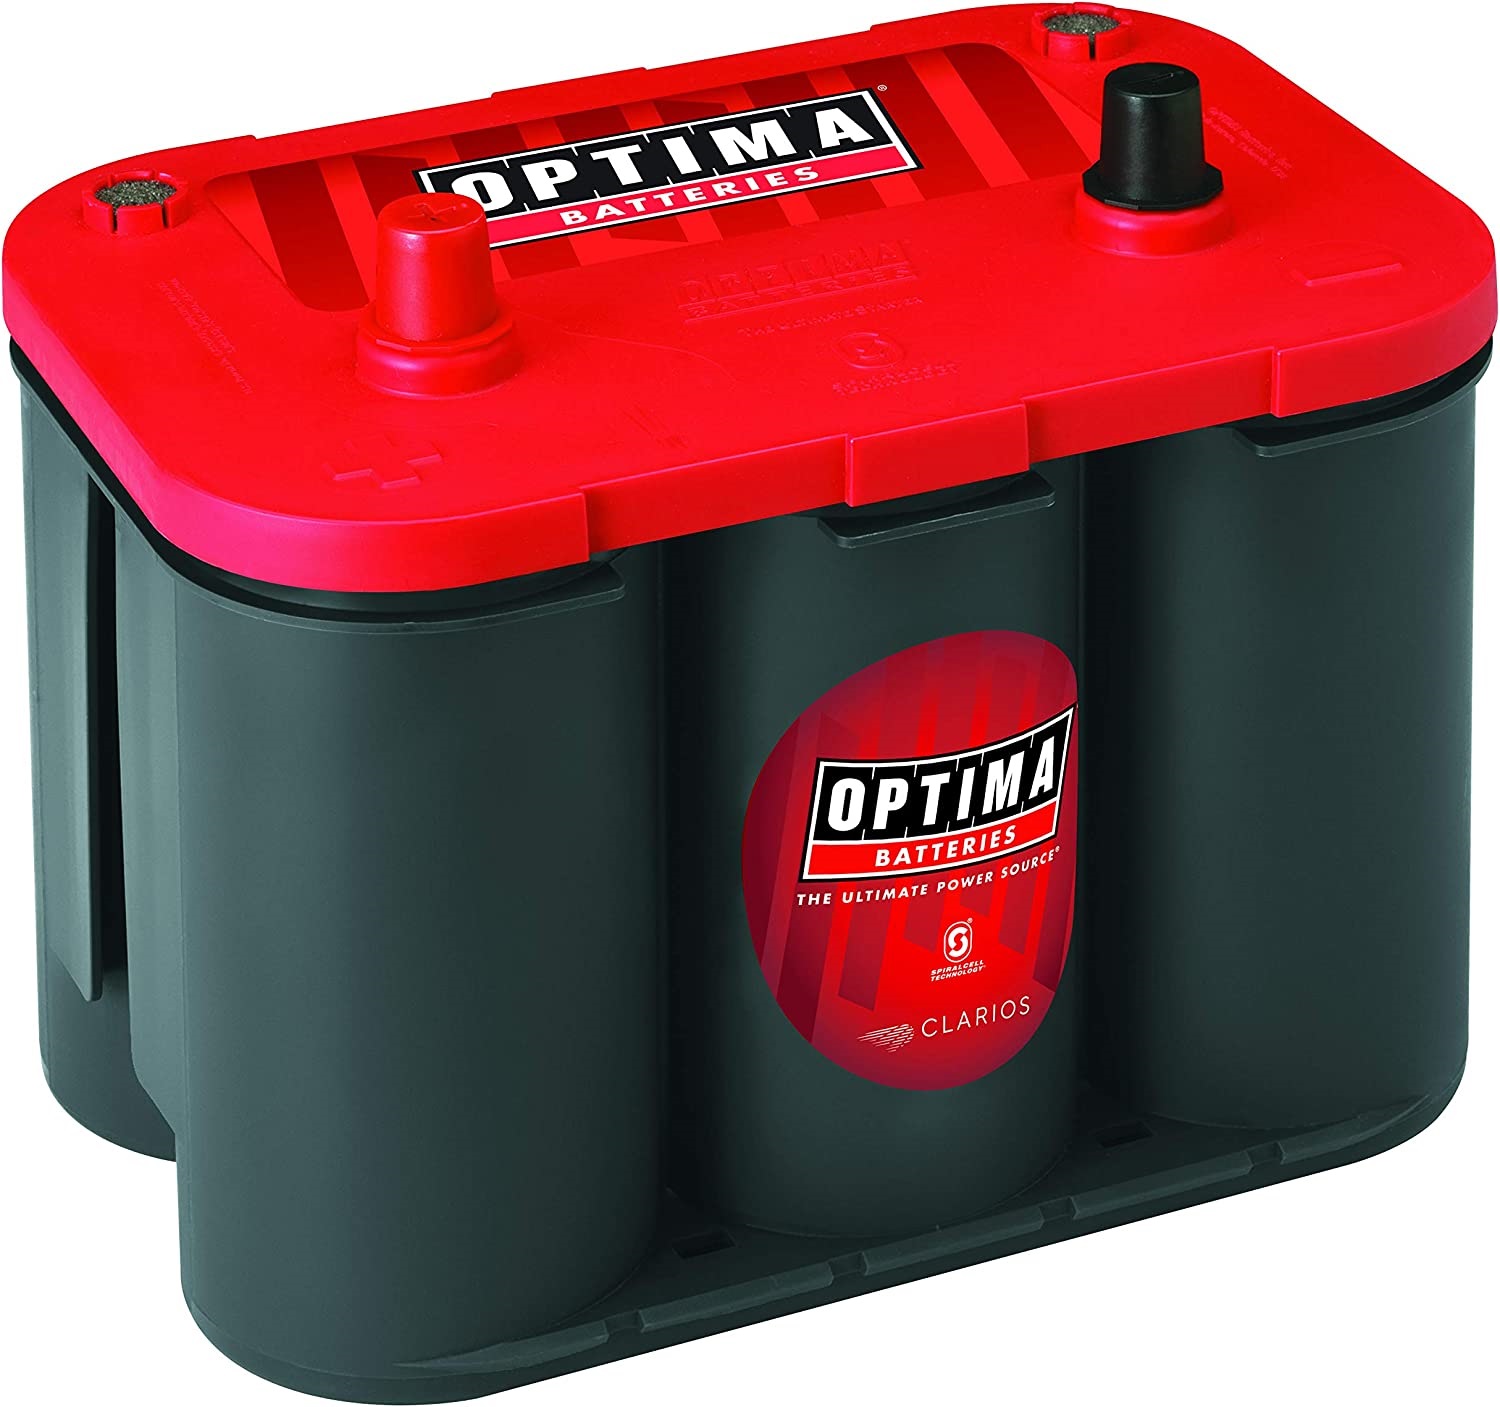 Optima Batteries RedTop 12-Volt Battery Model/BCI Group: 34 replaces Summit Racing ULT-9002-002 4